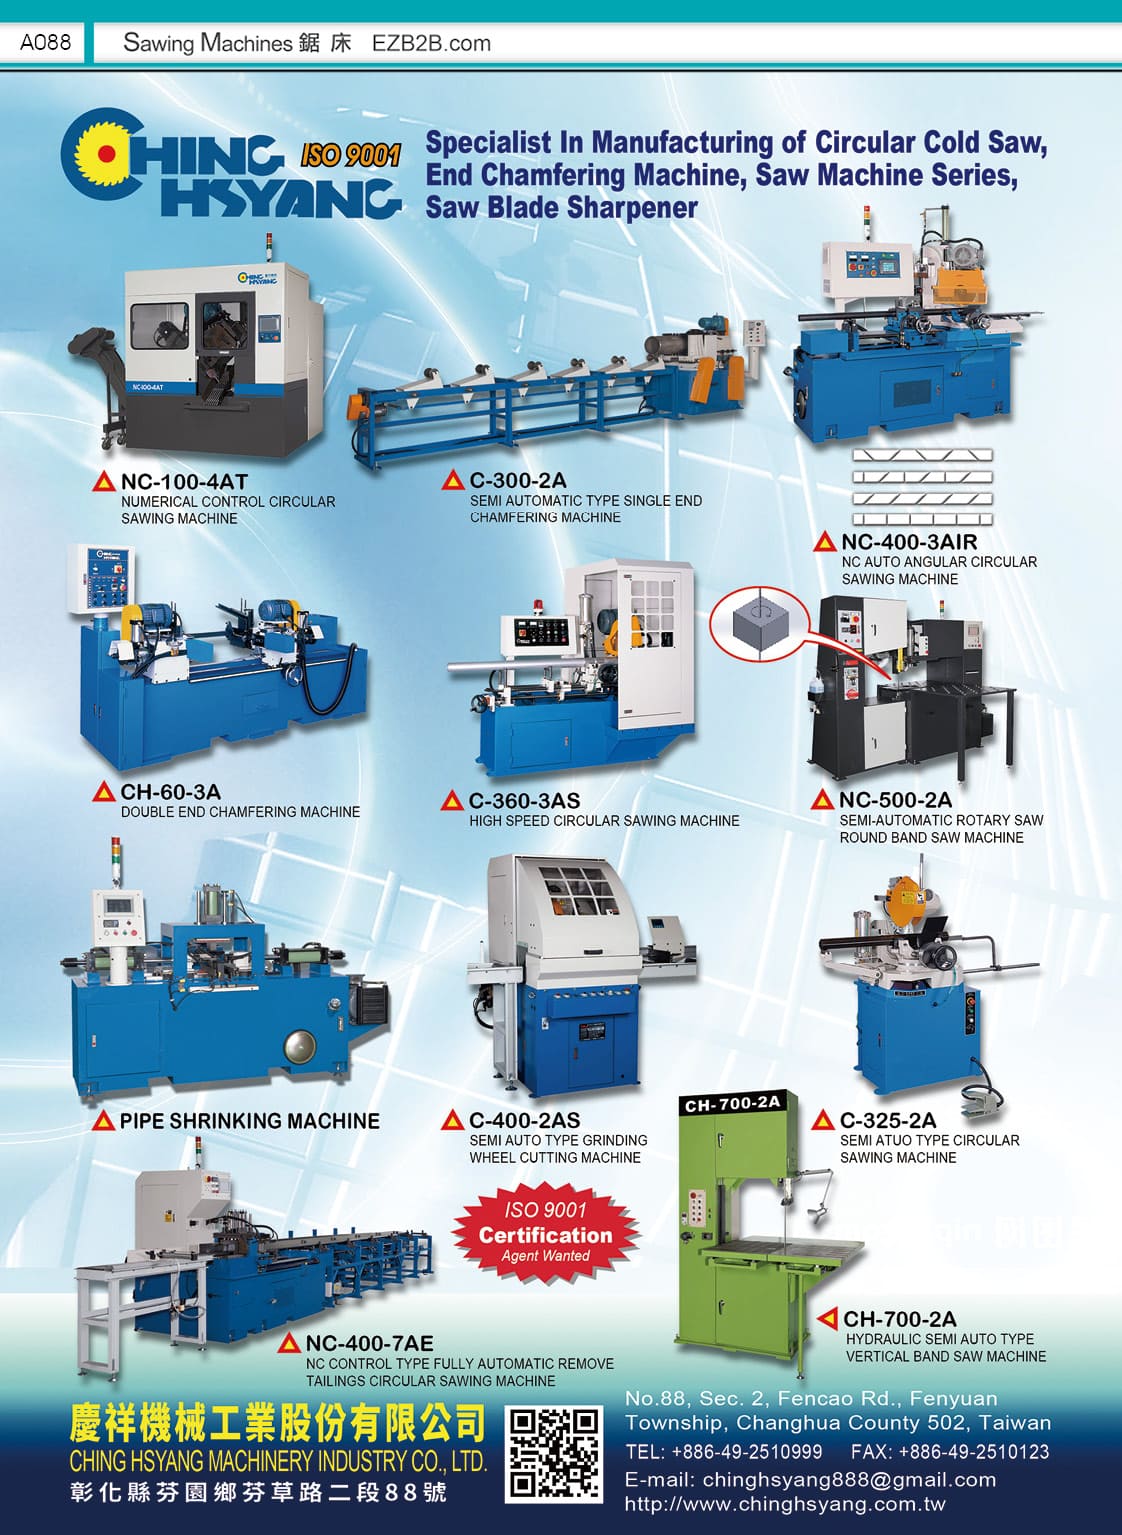 CHING HSYANG MACHINERY INDUSTRY CO., LTD.